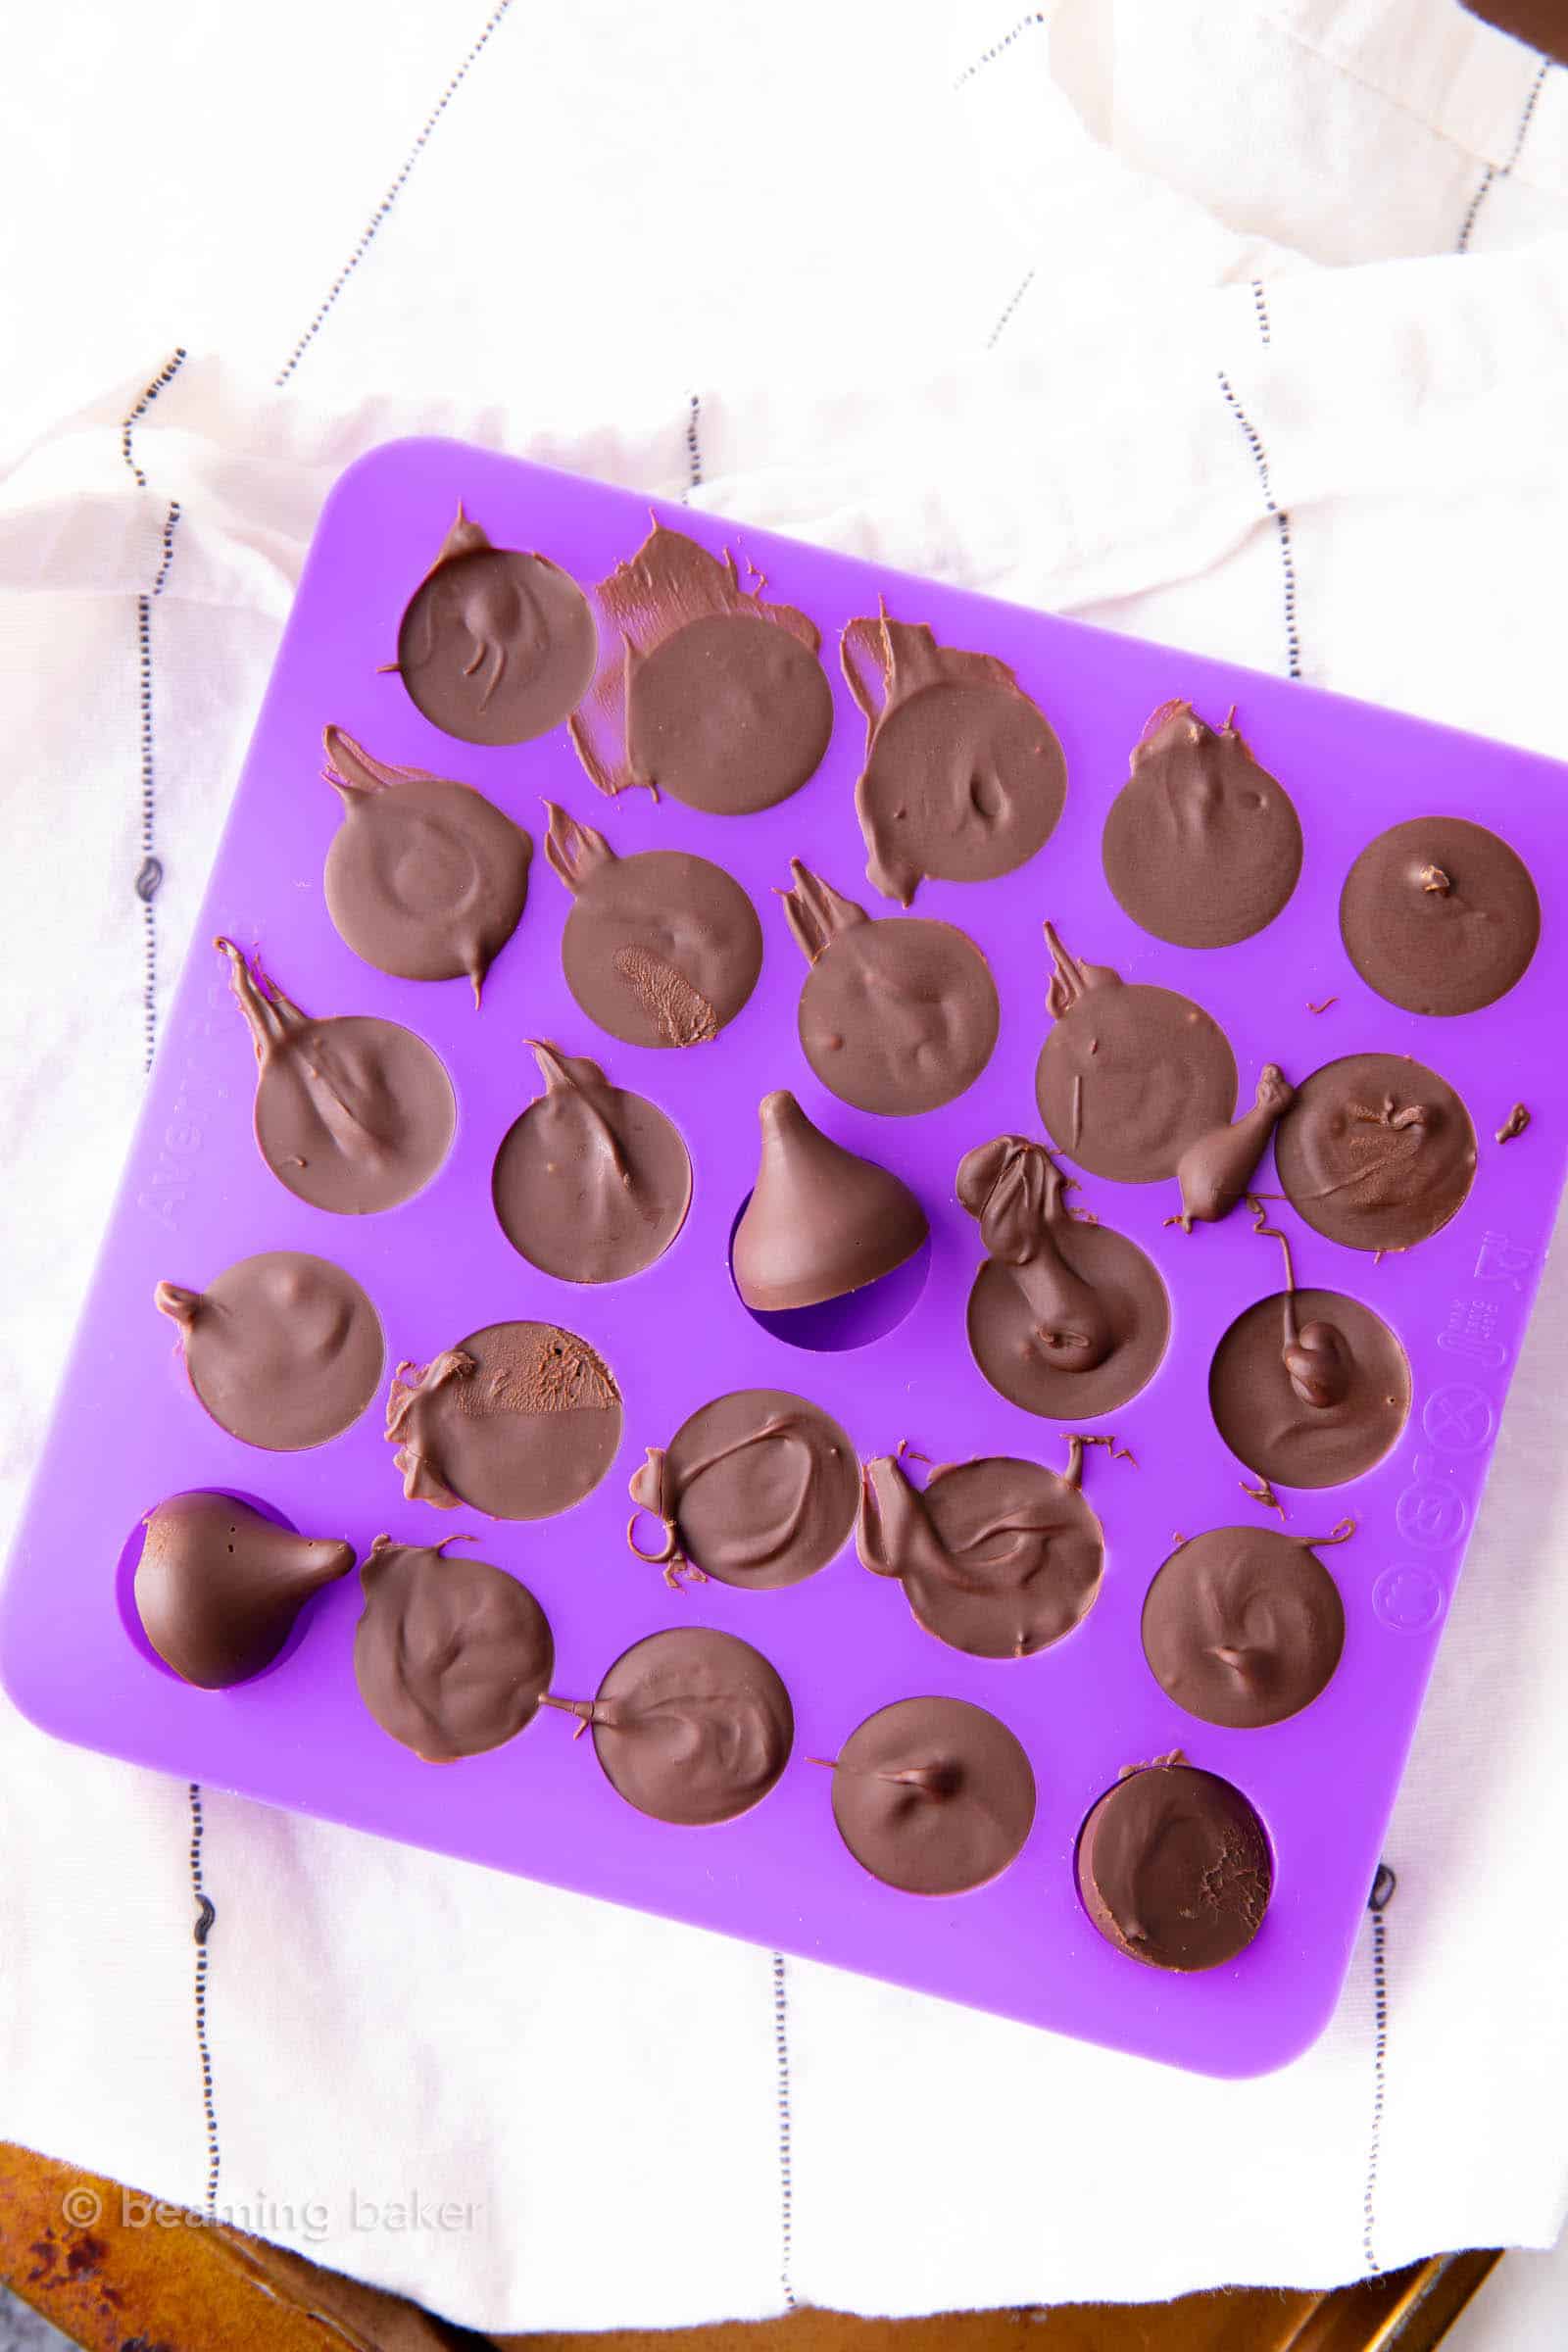 the candy making mold I use to make vegan Hershey kisses